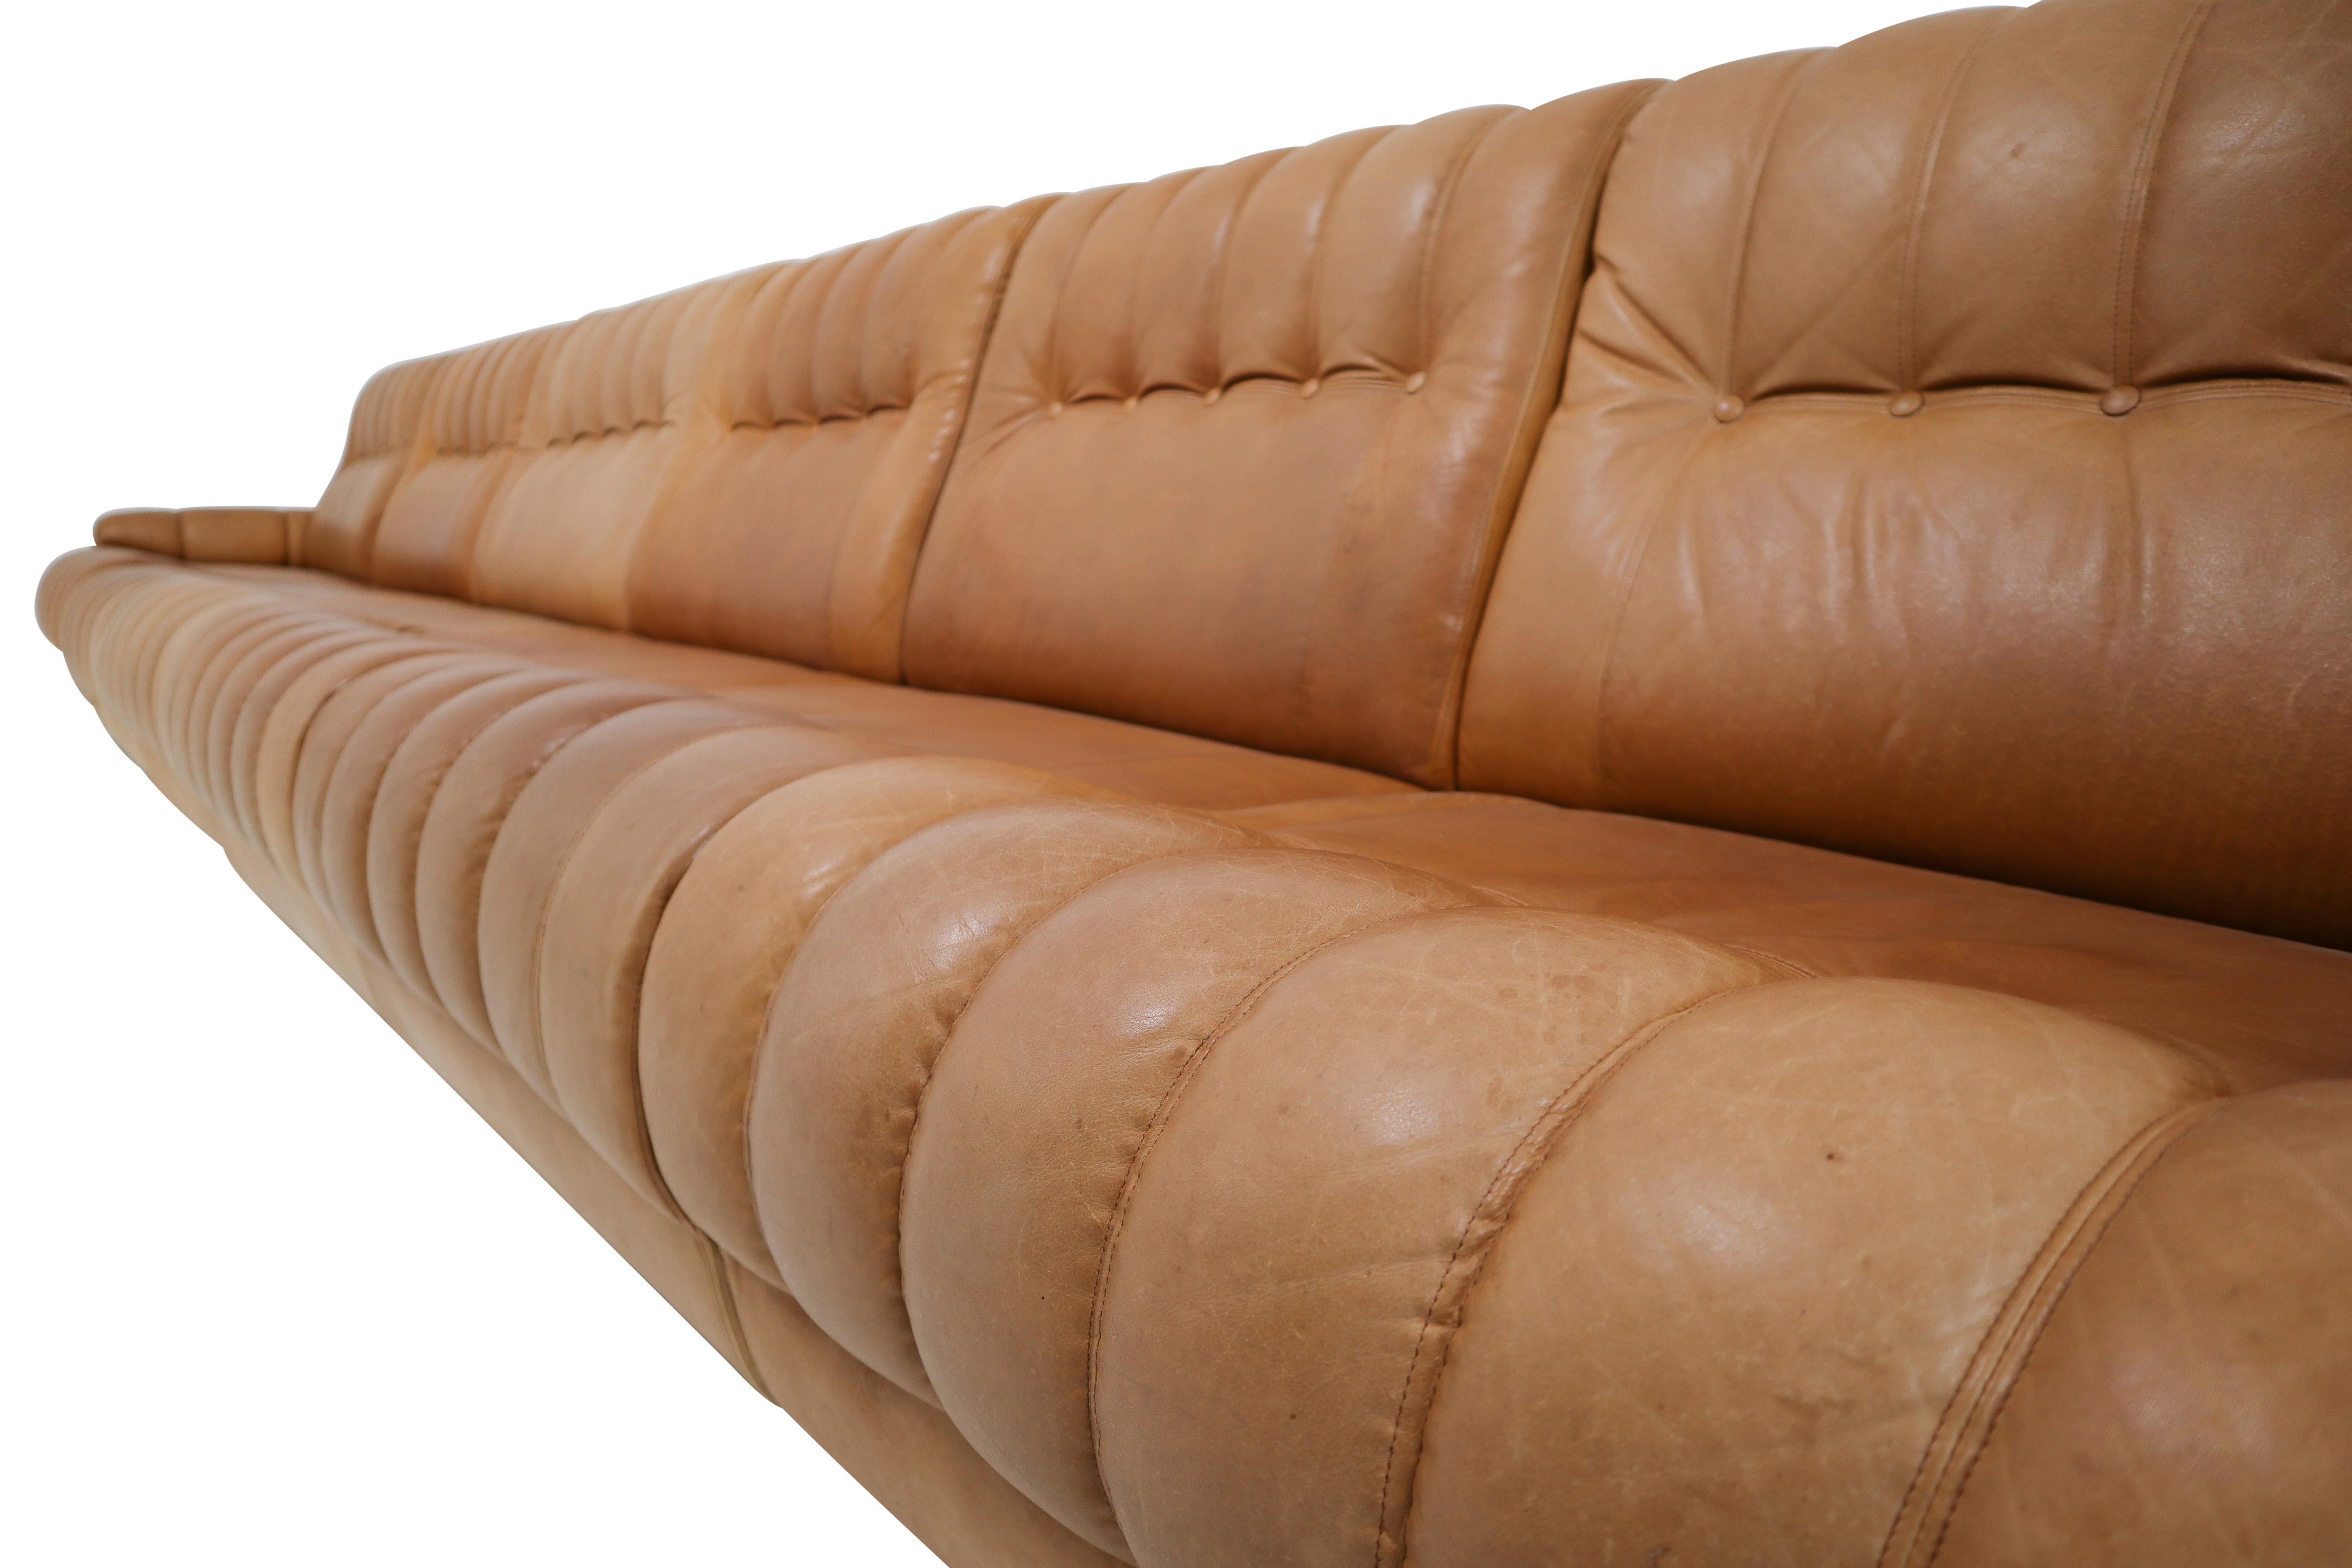 Impressive, 1970s sectional sofa and matching ottoman in cognac leather. Exceptional condition (used distressed patina) and extremely comfortable. This sofa connects in six separate pieces for easy attachment. Stitched leather detailing throughout